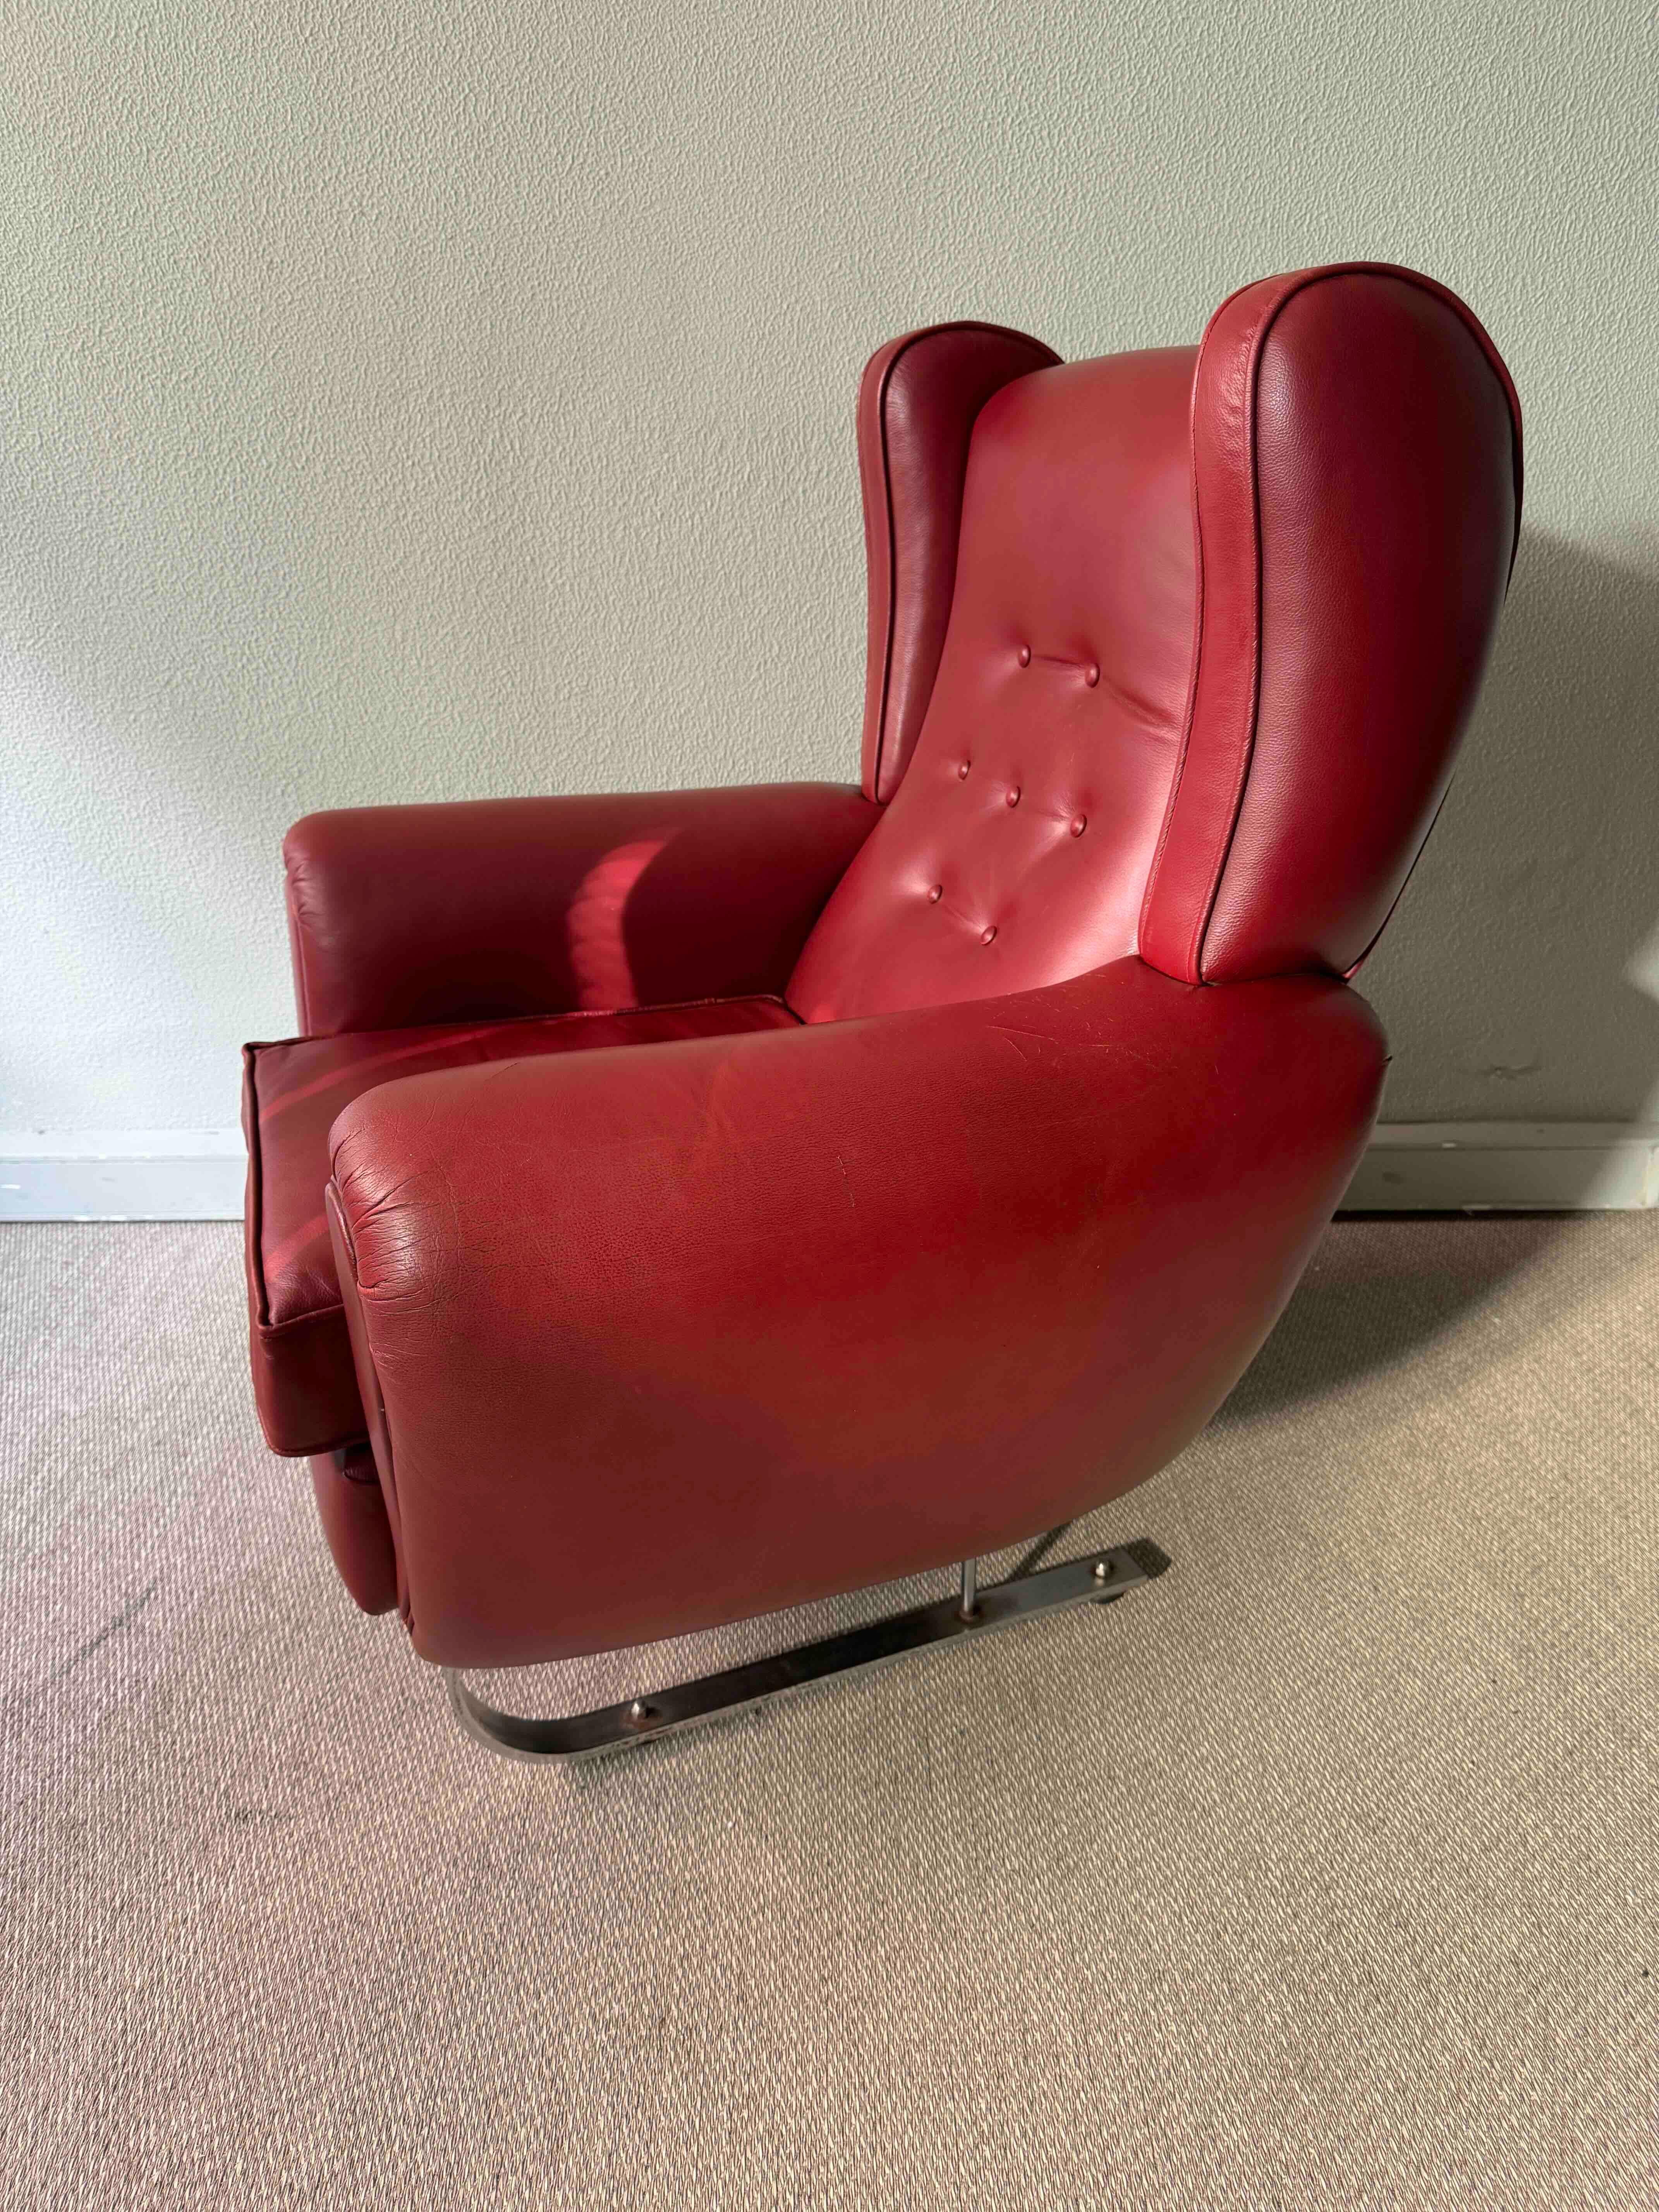 Pair of Mid Century Modern Armchairs attributed to H. W. Klein, Denmark 1960's For Sale 6